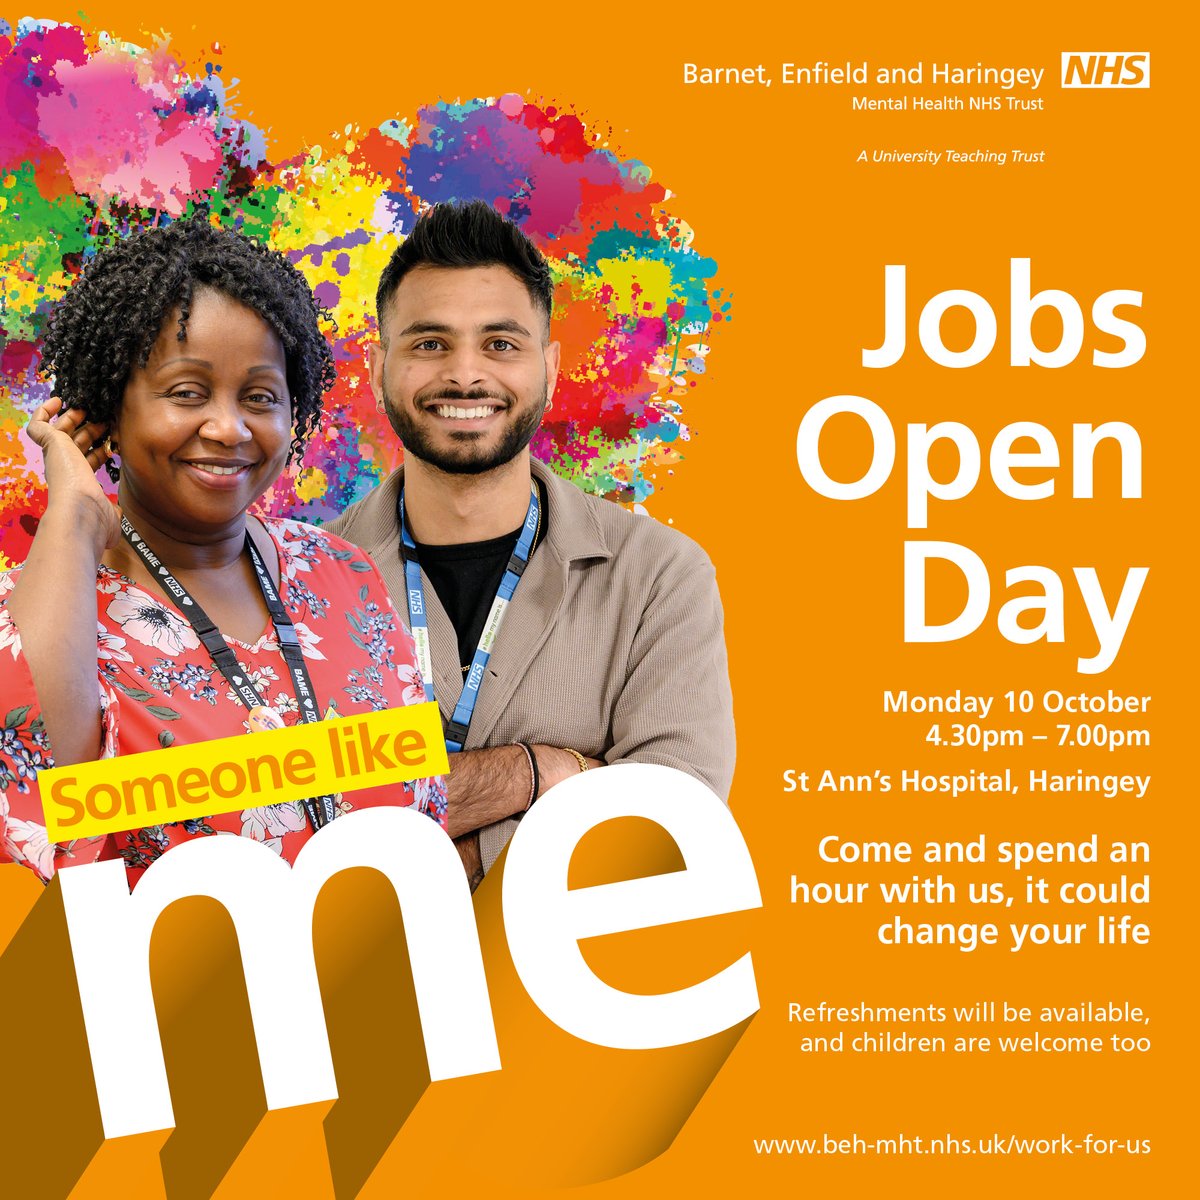 JOIN US for our Jobs Open Day at St Ann's Hospital on 10th Oct. Find out what it's really like to work in Mental Health Services SIGN UP ➡️ bit.ly/JobsOpenDay #NHSJobs #nhscareer #MentalHealthJobs #barnetjobs #enfieldjobs #haringeyjobs #CAMHSjob #healthcarejobs #TeamBEH